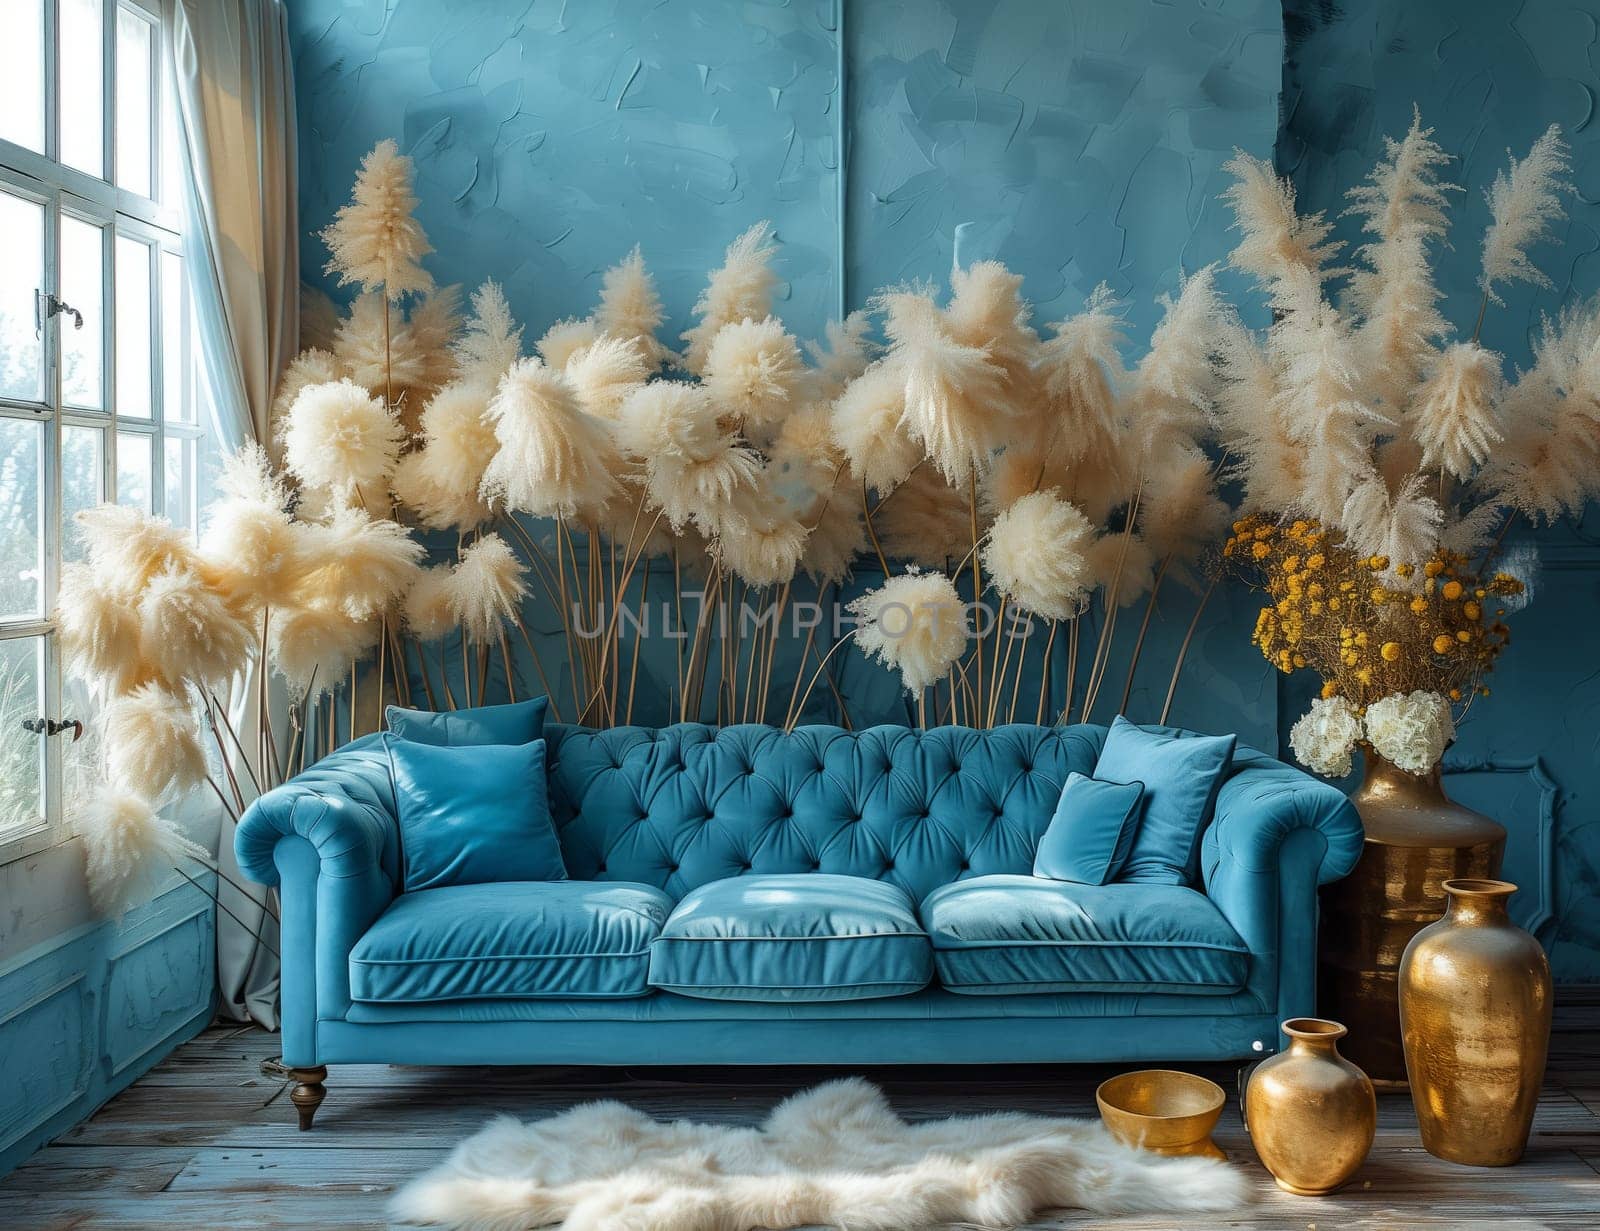 An interior design featuring a living room with a beautiful azure couch, vases filled with aqua flowers. The rectangleshaped room is complemented by a tree outside, creating a serene atmosphere